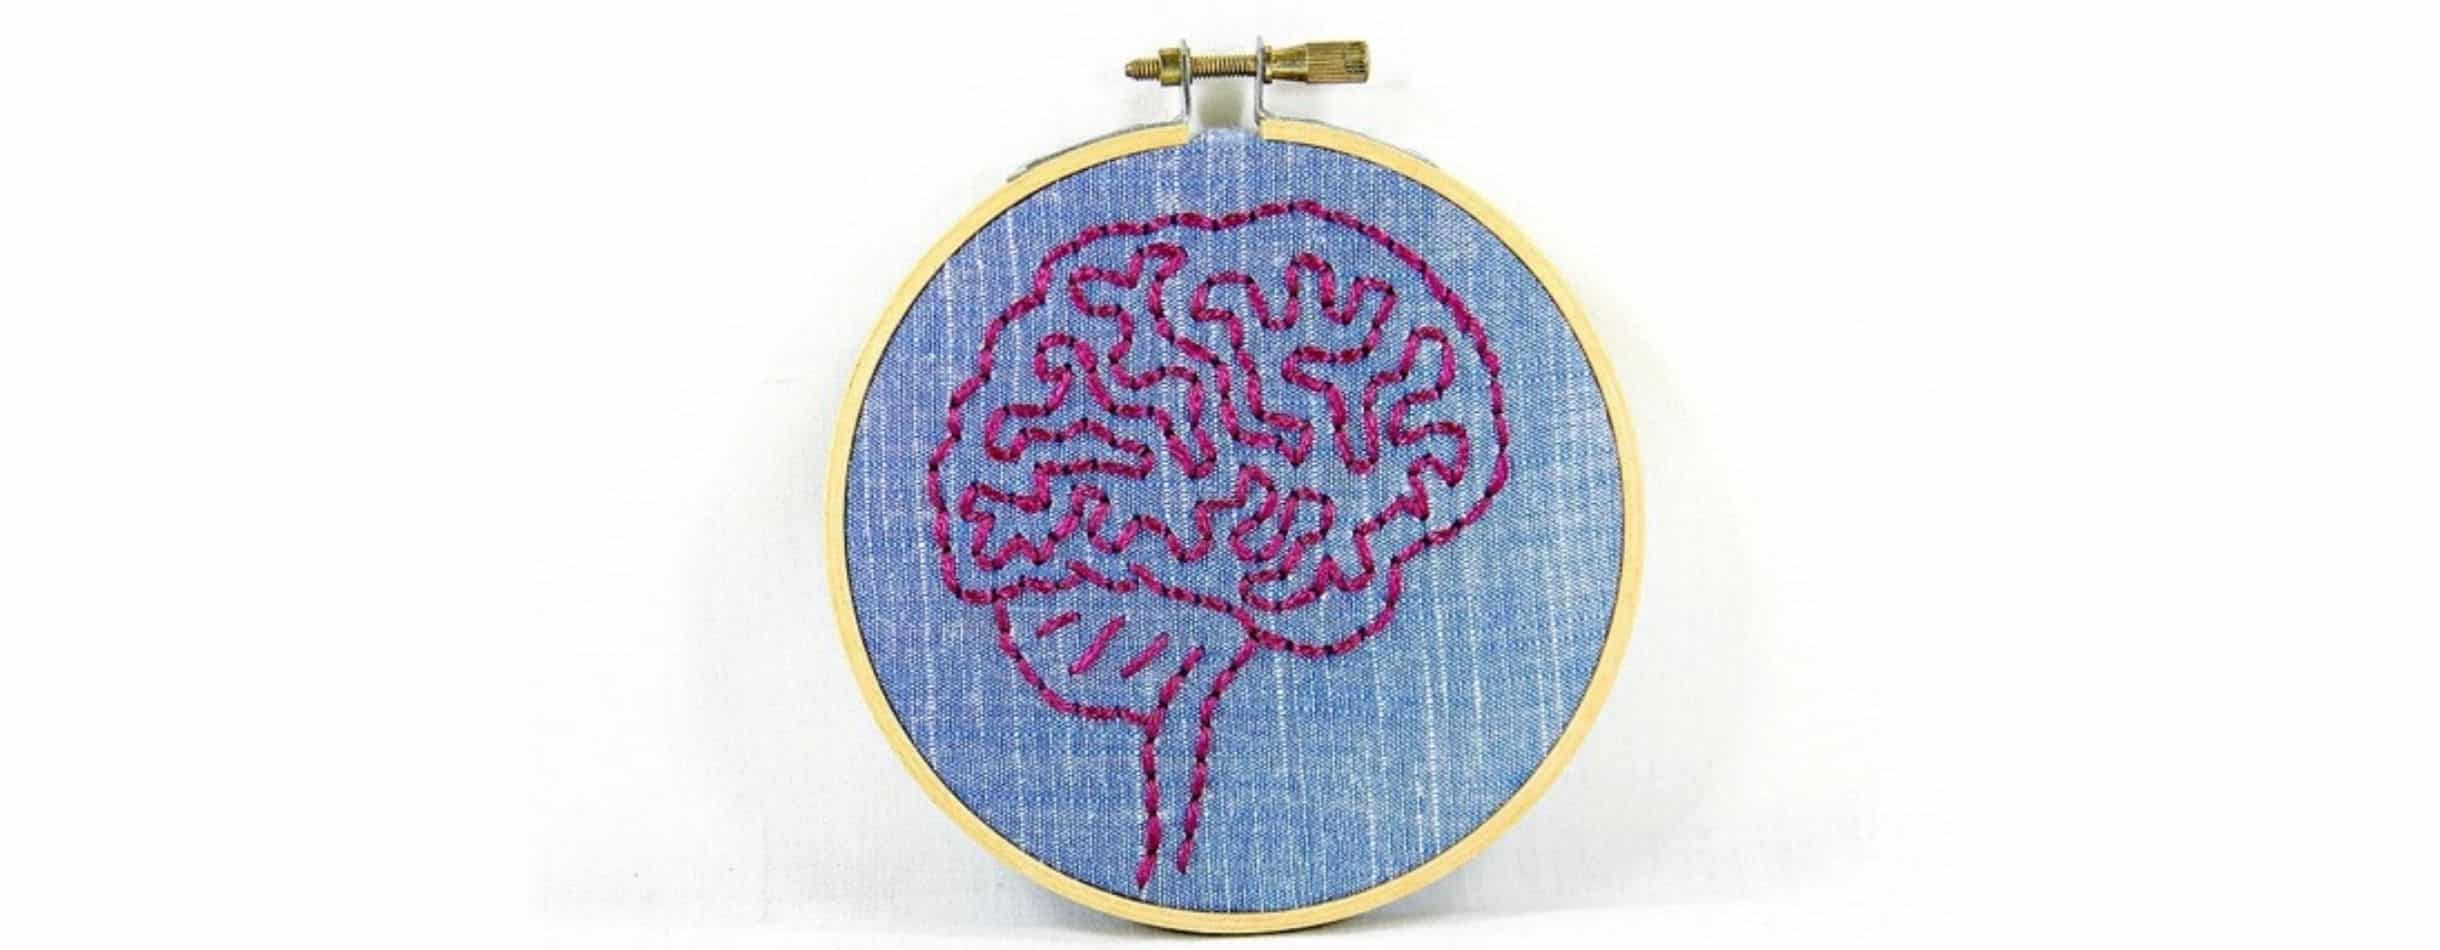 Stitching of the Brain to showcase Does Philanthropy Really Need Reinventing?